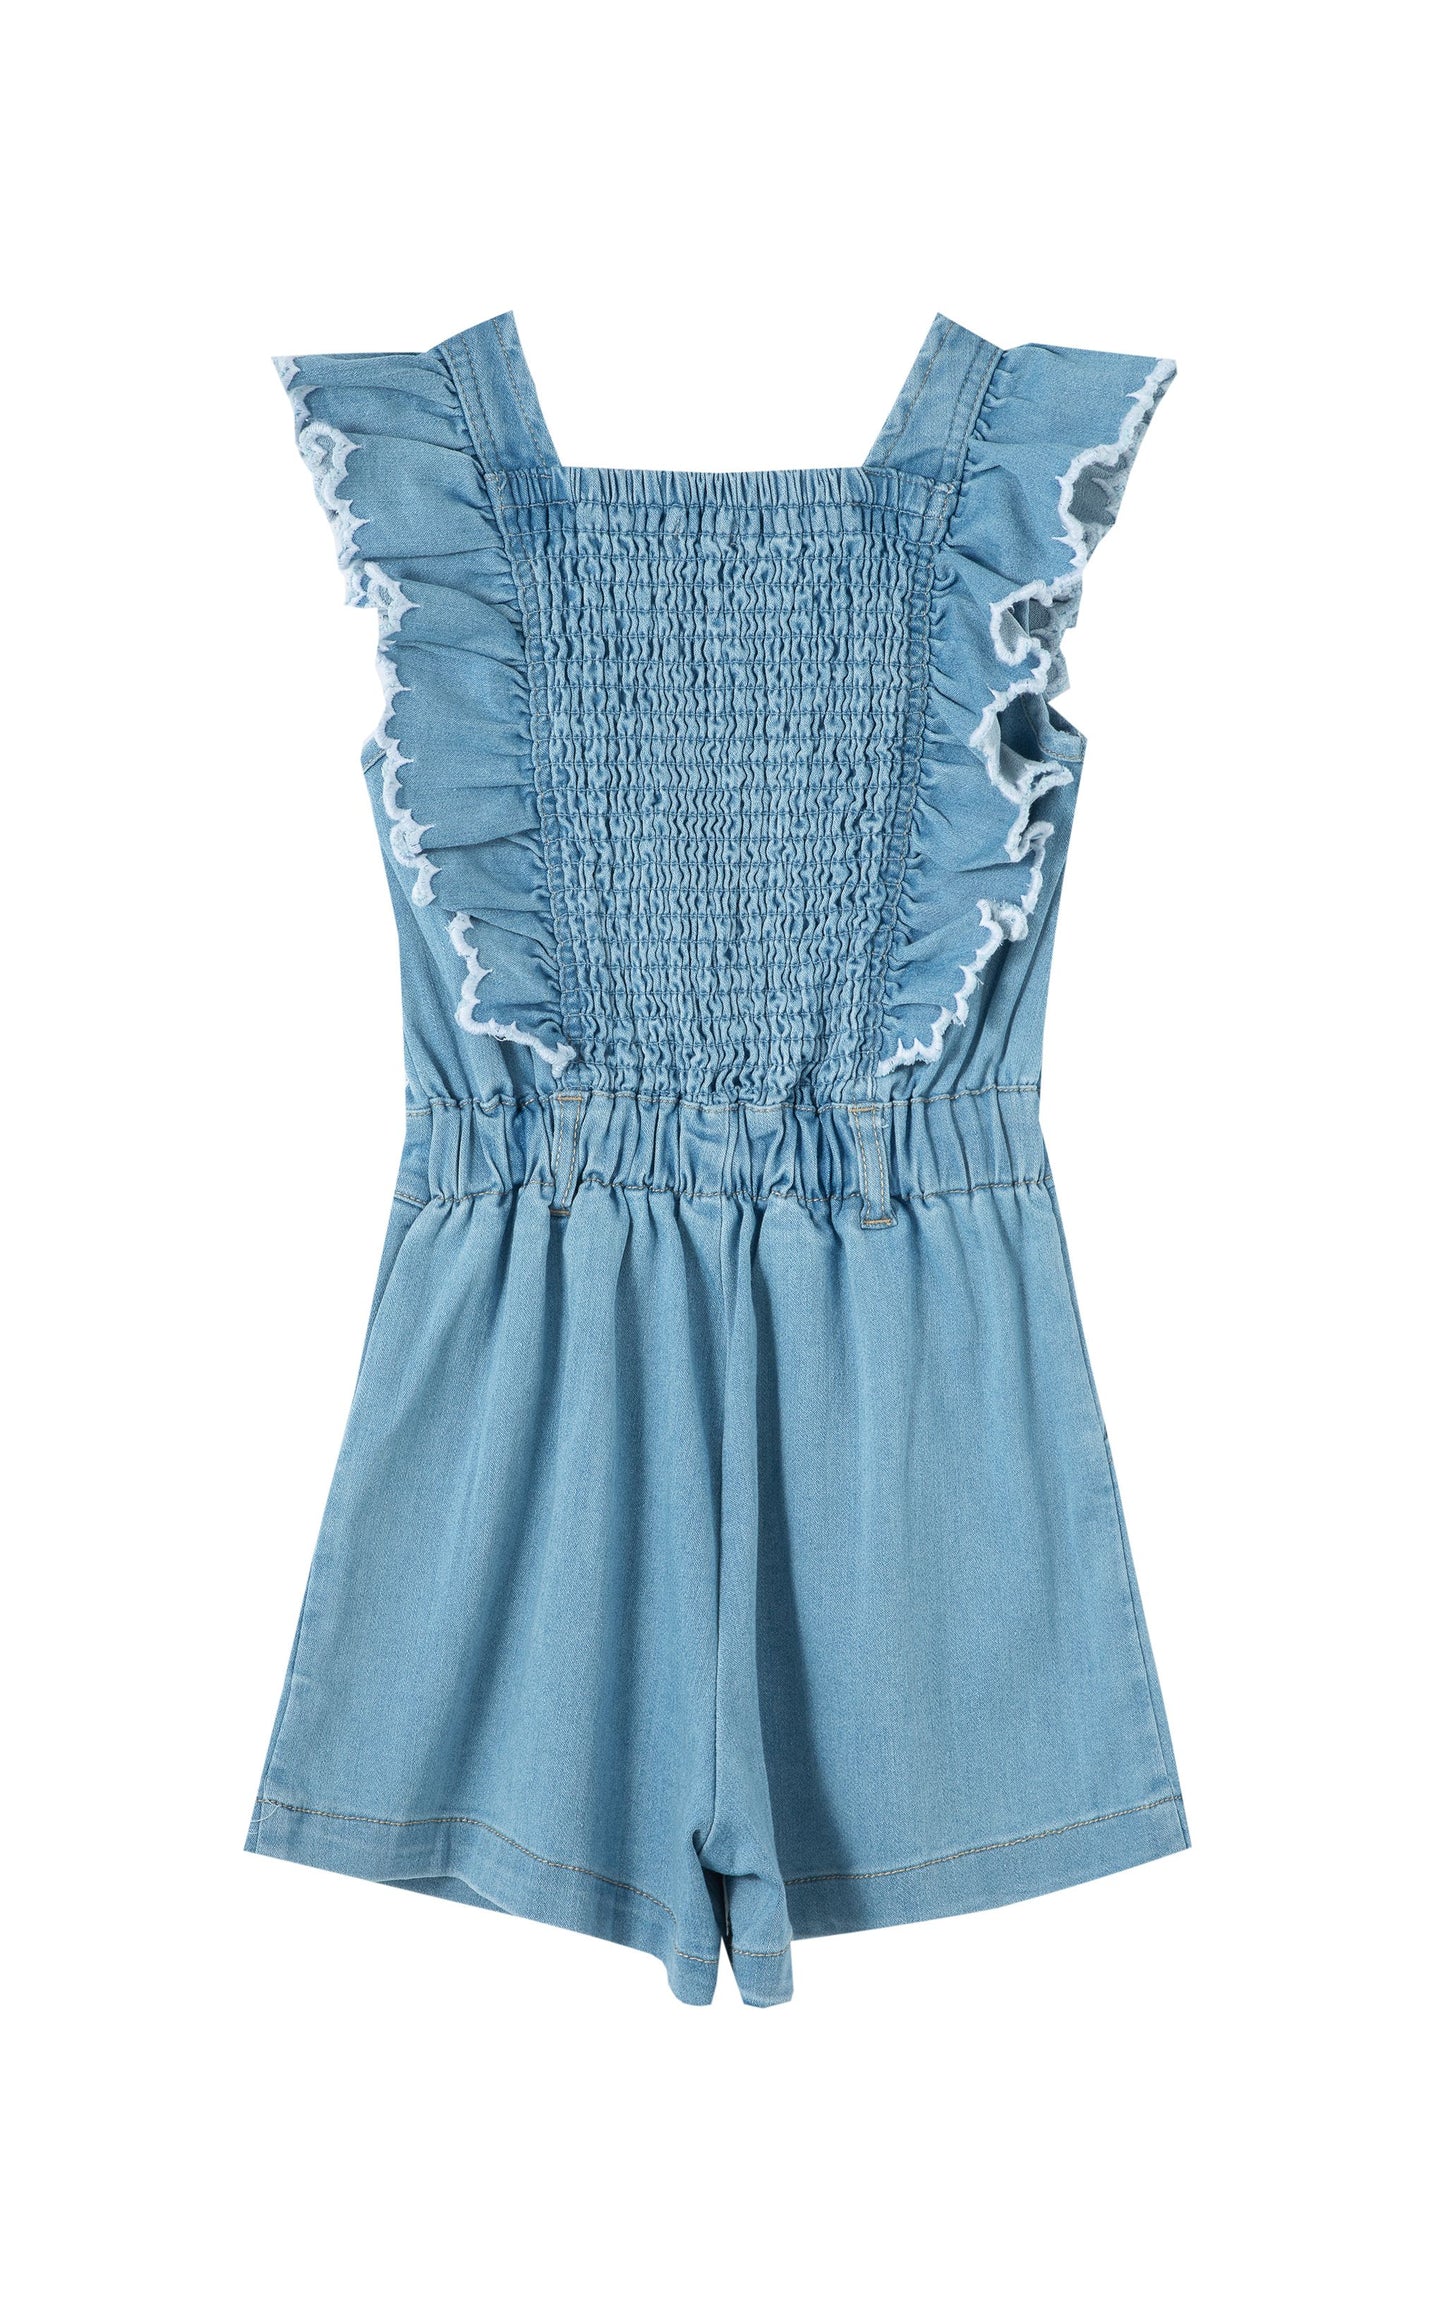 Ruffle Romper with Contrast Edge